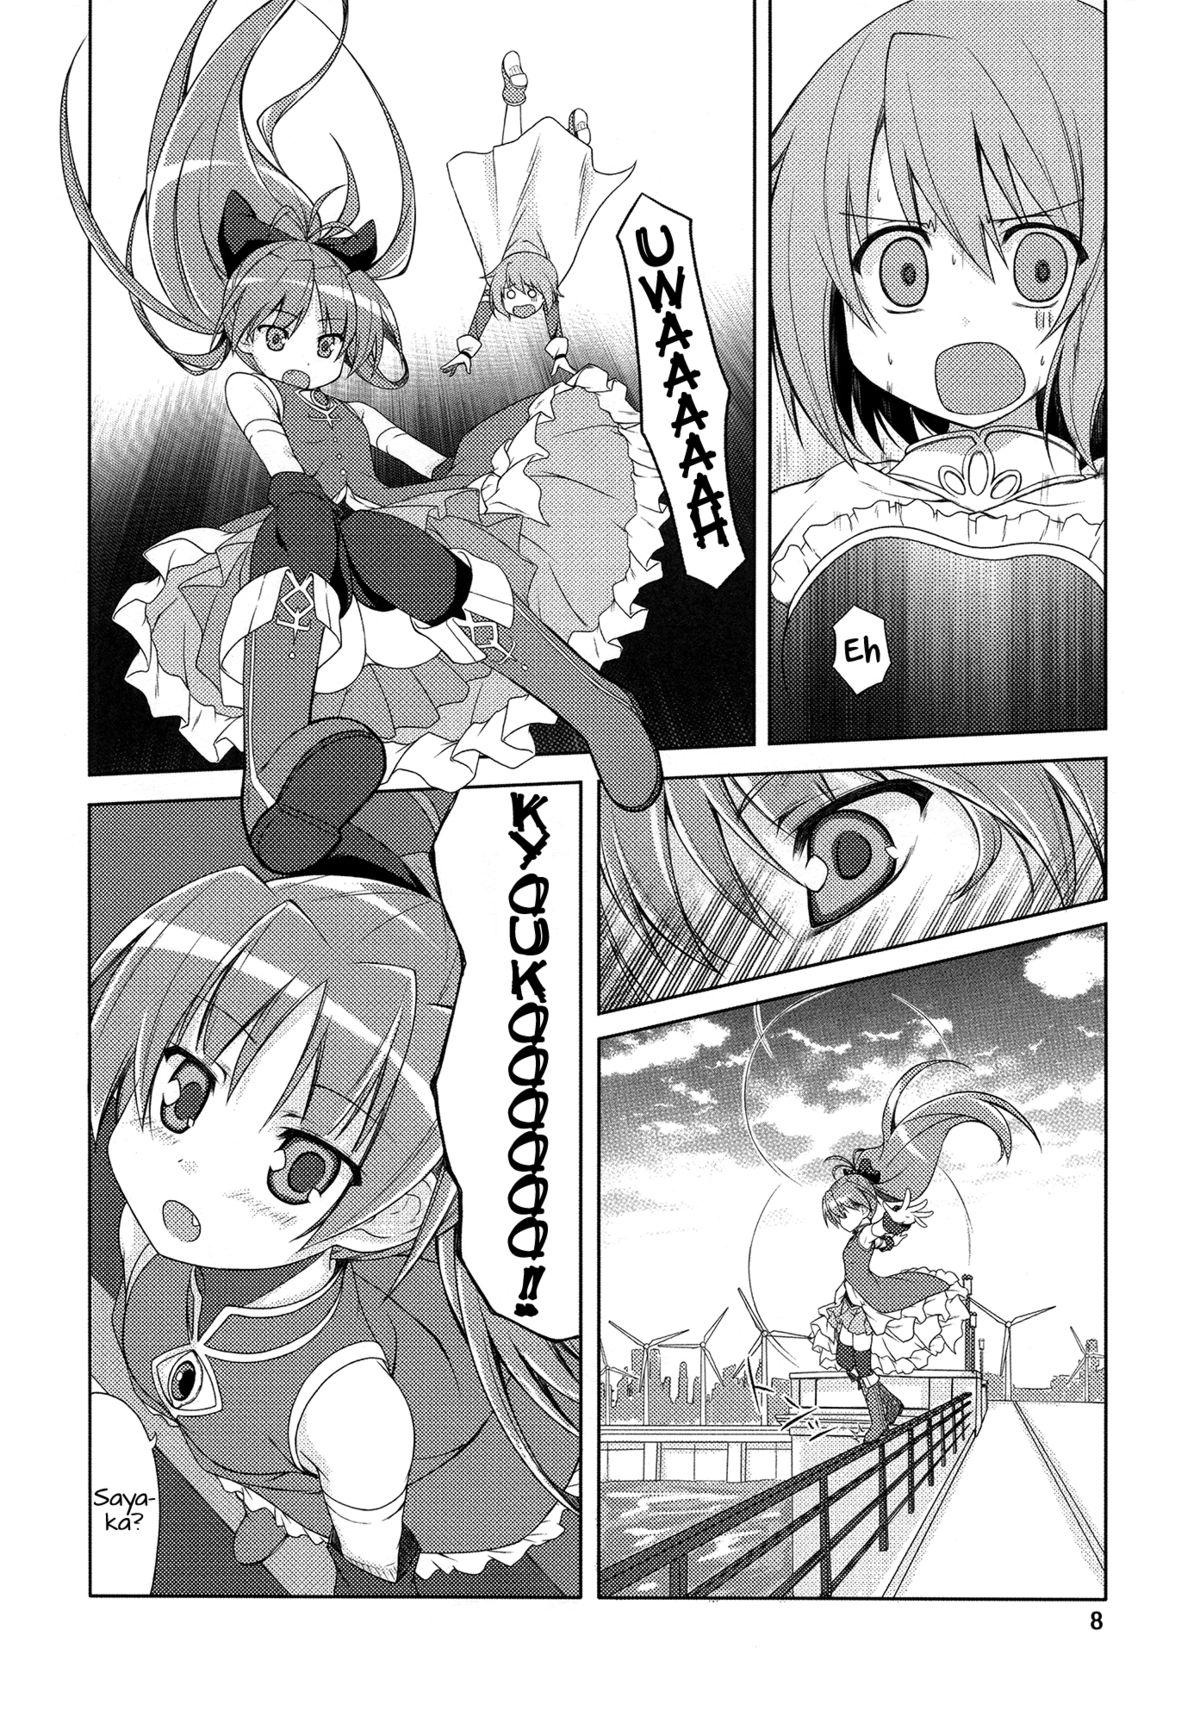 Audition Be with you - Puella magi madoka magica Bed - Page 7